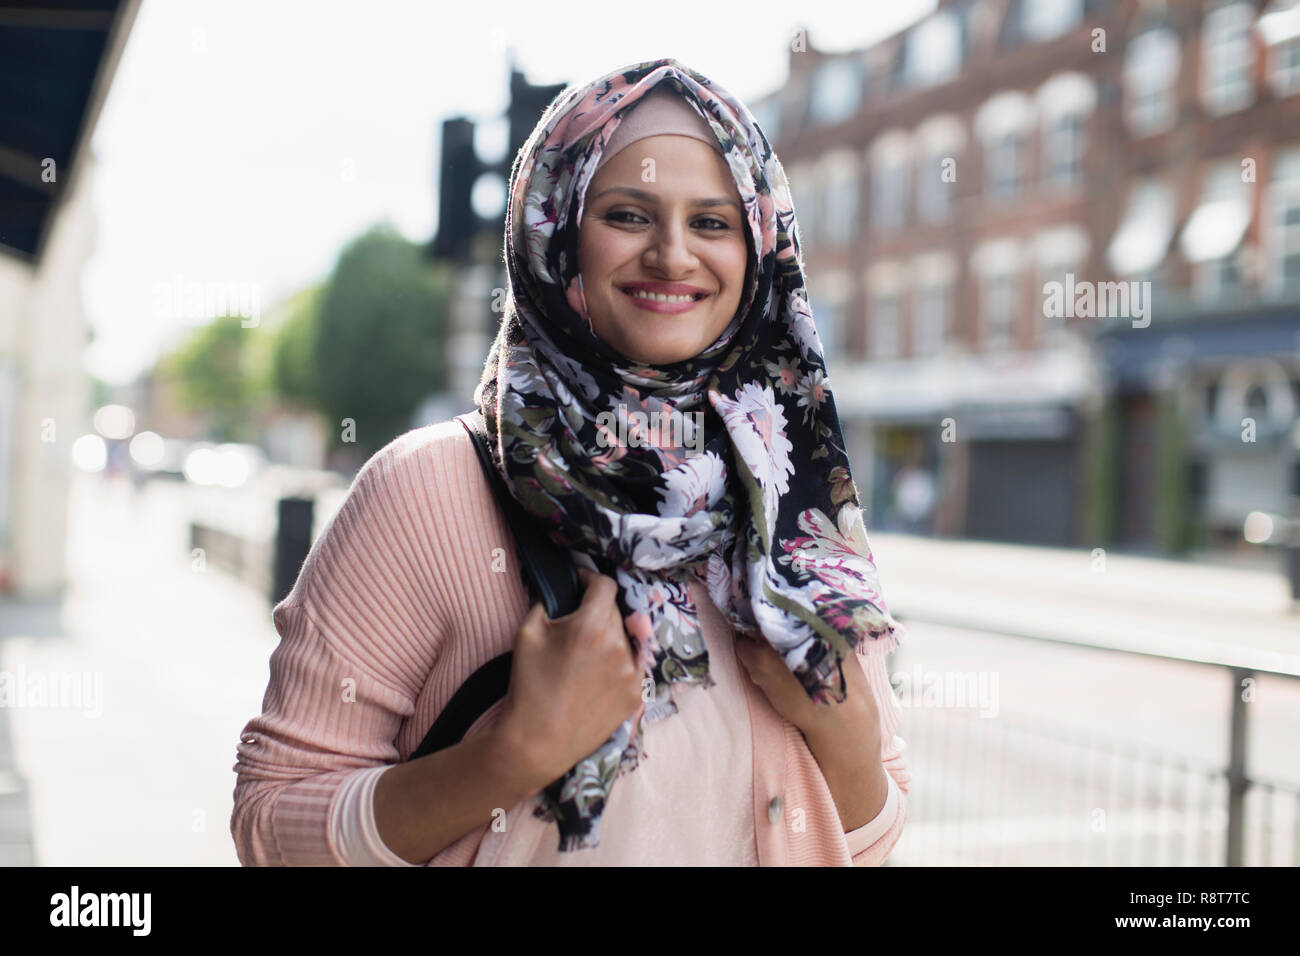 Portrait smiling, young woman wearing floral hijab on urban sidewalk Stock Photo